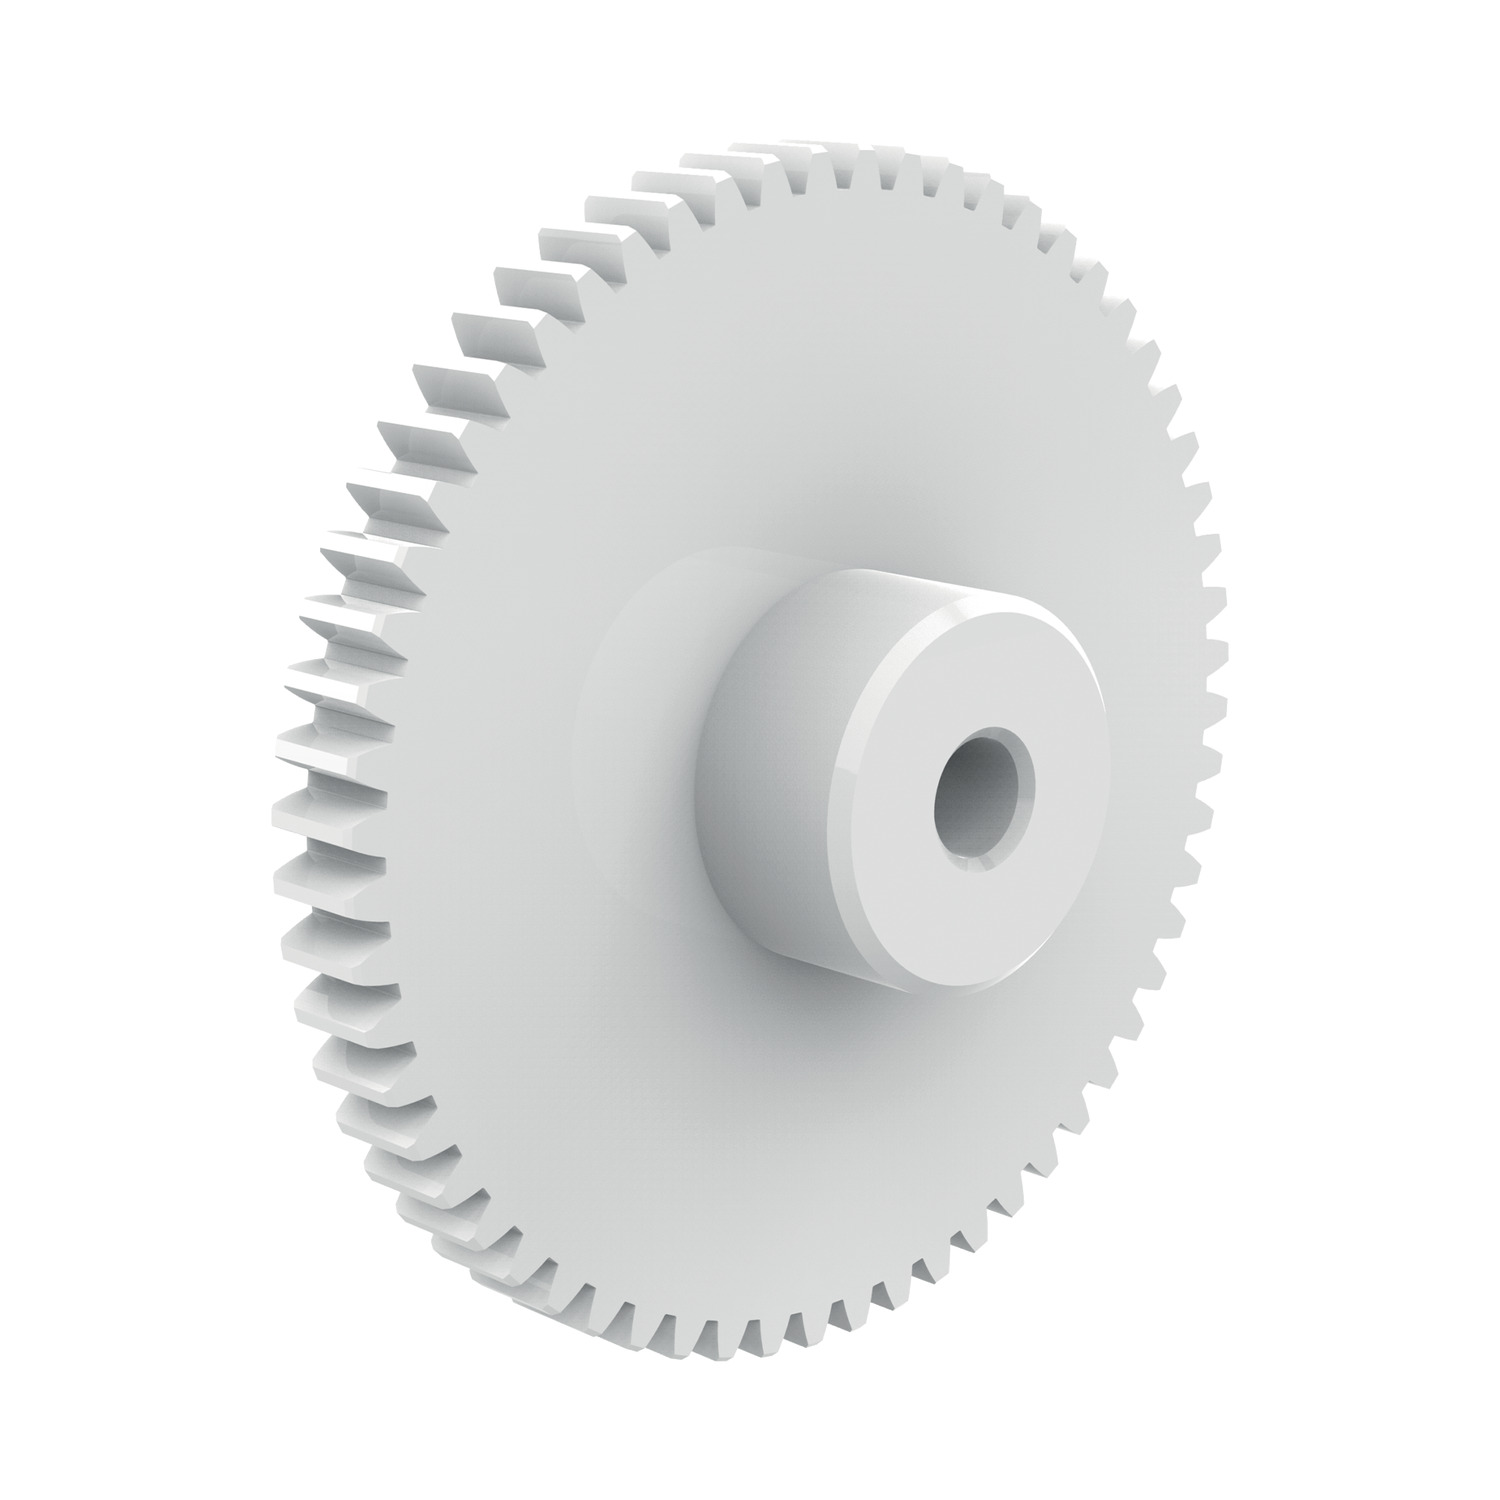 Spur Gears - Module 0.5 - Plastic Plastic Spur Gears can be a cheaper alternative to Metal Spur Gears. We have white (machined - JIS B 1702-1 (ISO) class 9-10) and black (injection moulded - lower accuracy) versions in stock.